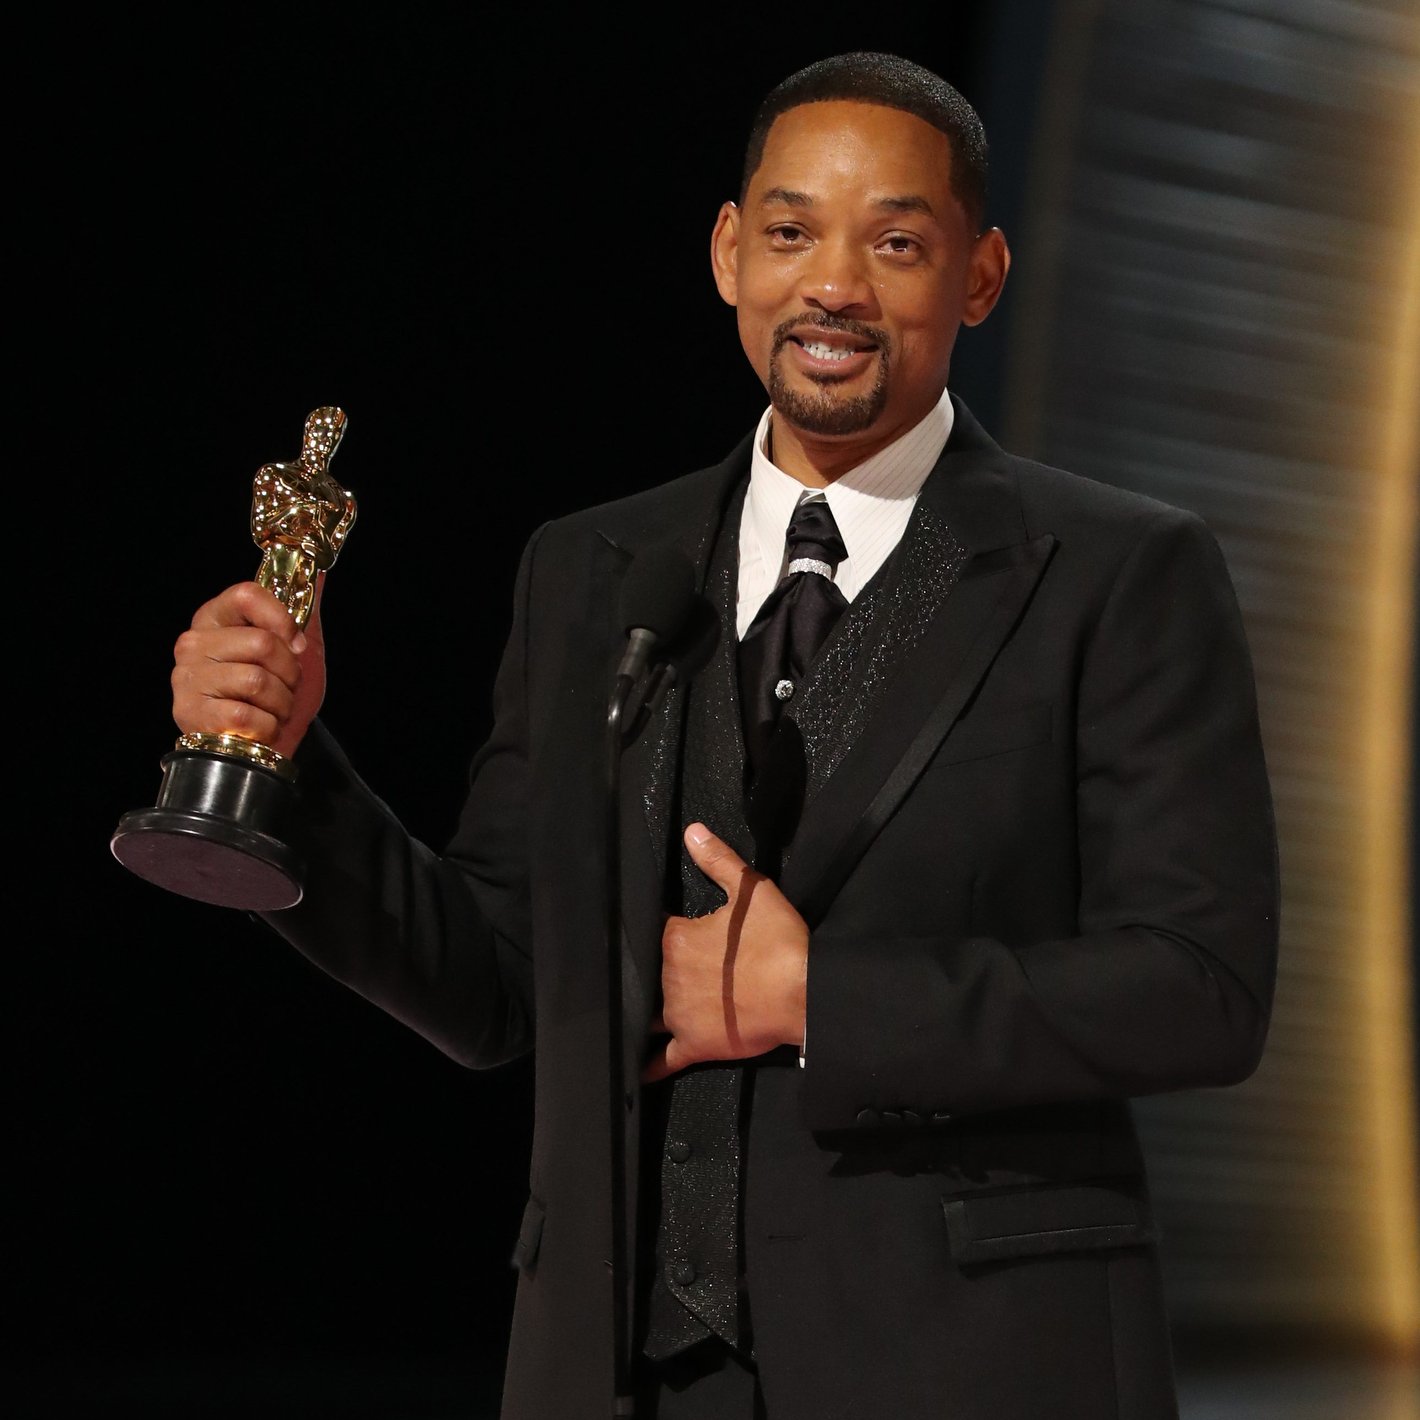  Academy Bans Will Smith from Oscars for 10 Years.